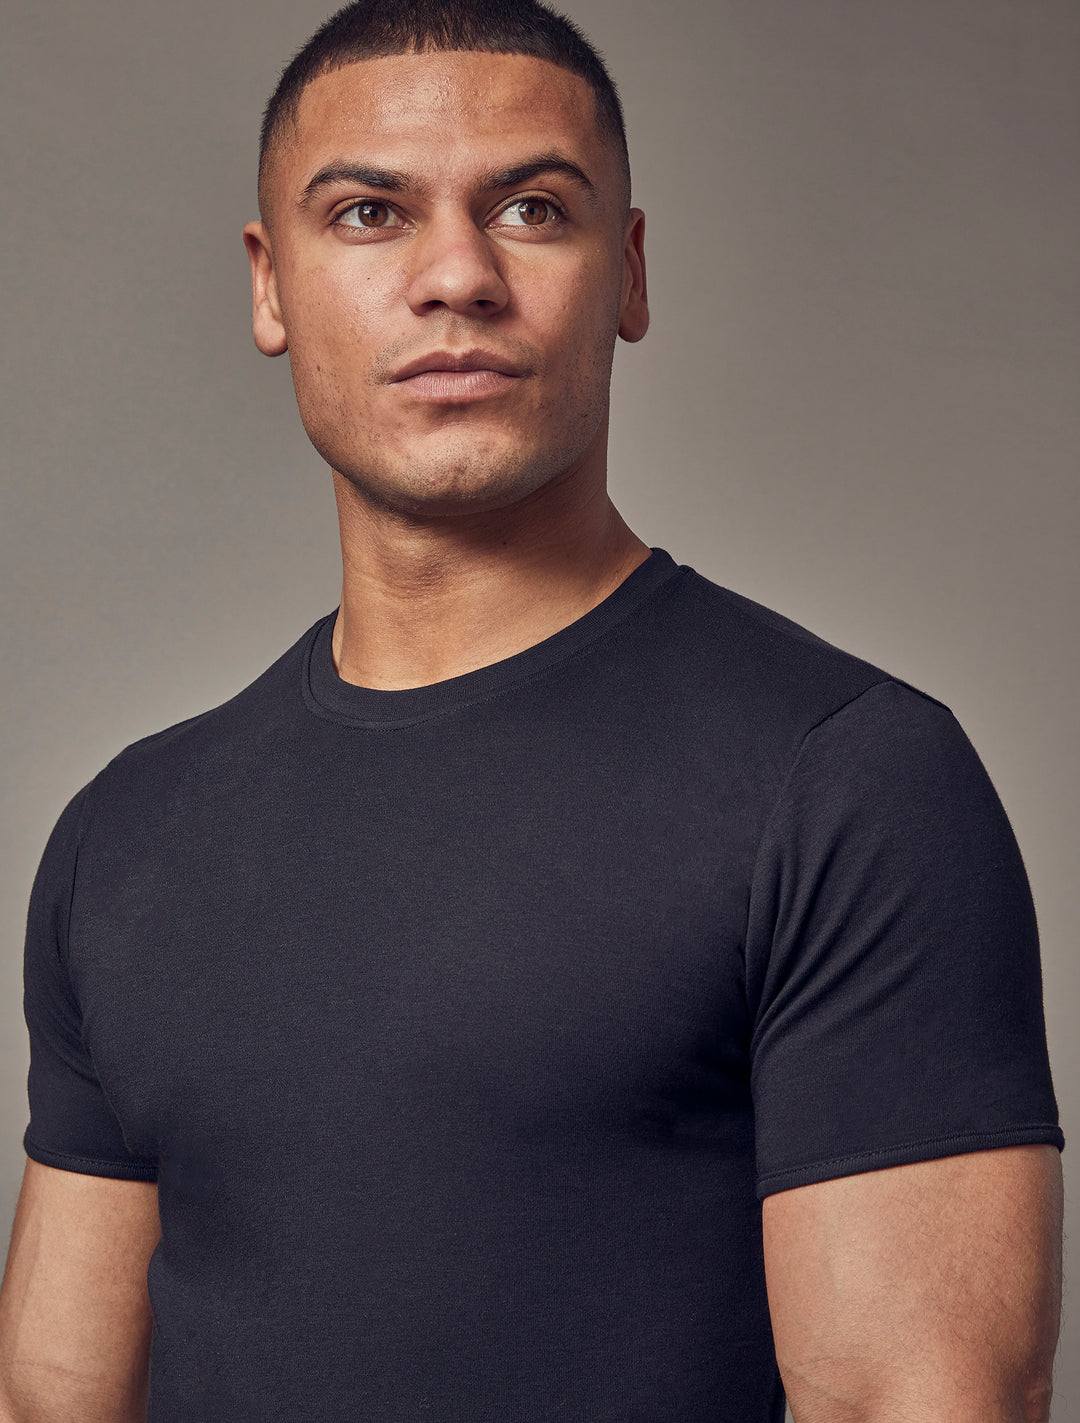 A black t-shirt with a tapered fit from Tapered Menswear, designed to accentuate the muscle fit features for a flattering and form-hugging appearance.